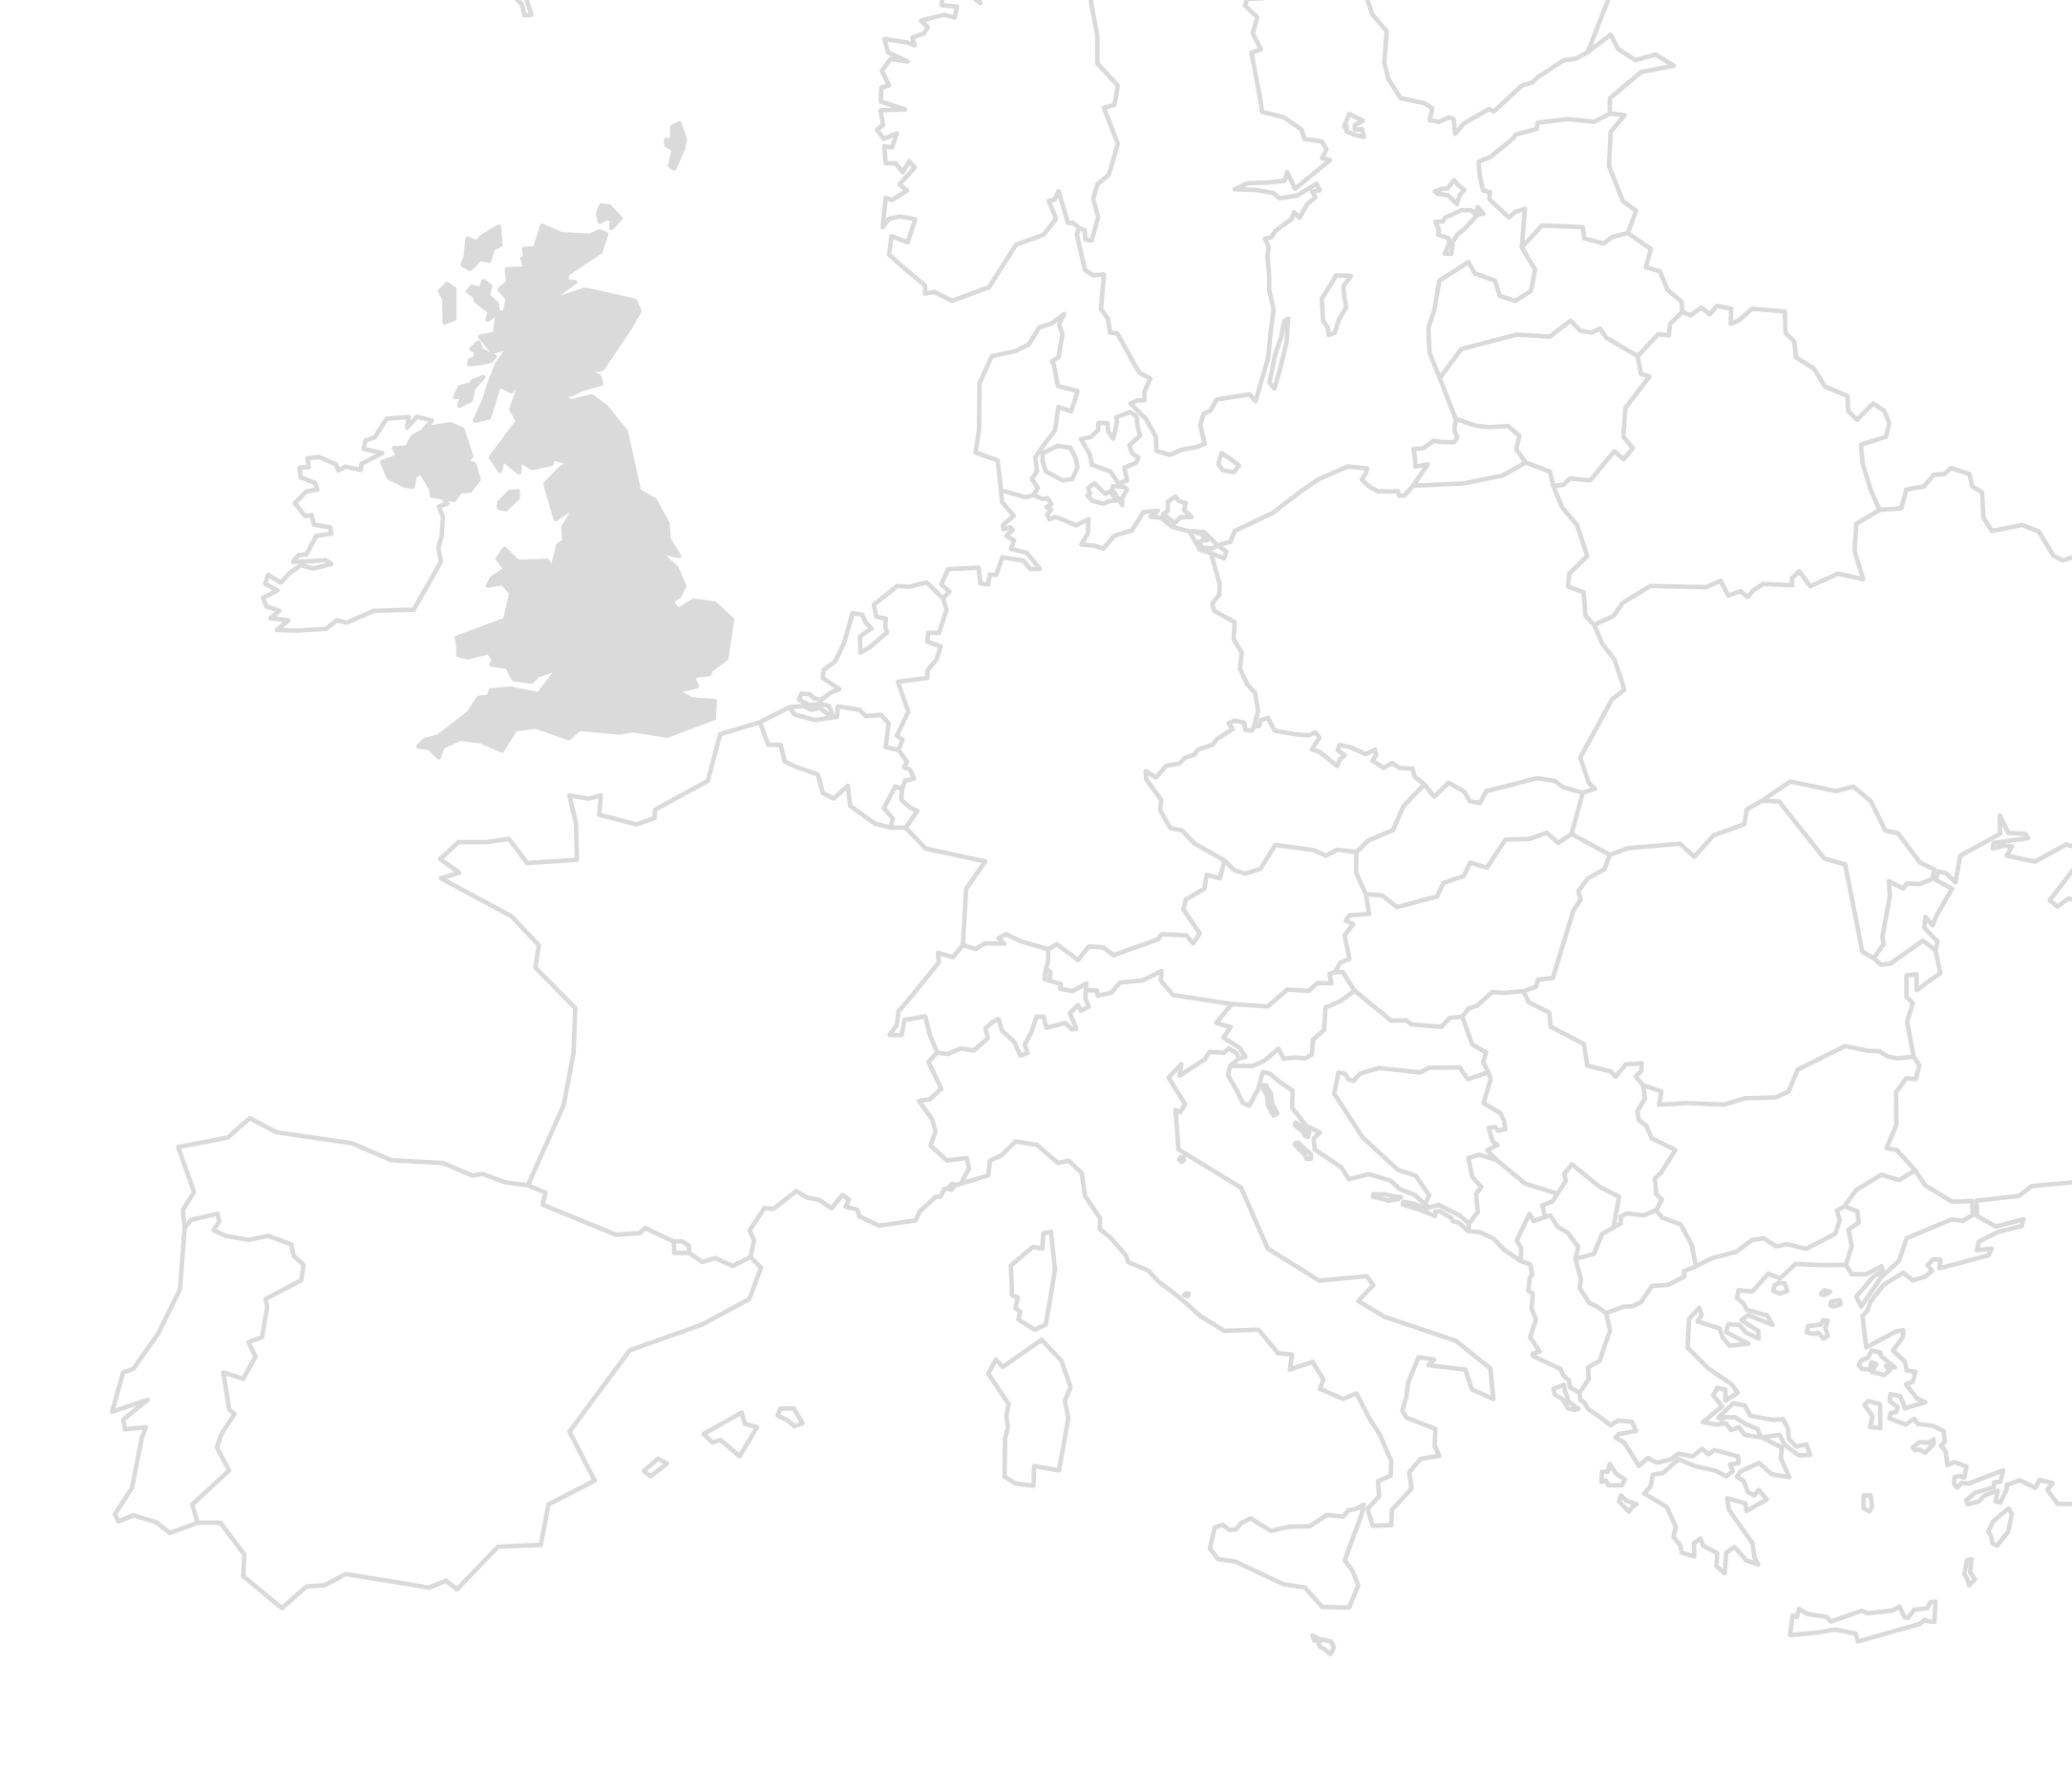 A map of Europe where UK is filled in gray to visualize the location of the construction project.